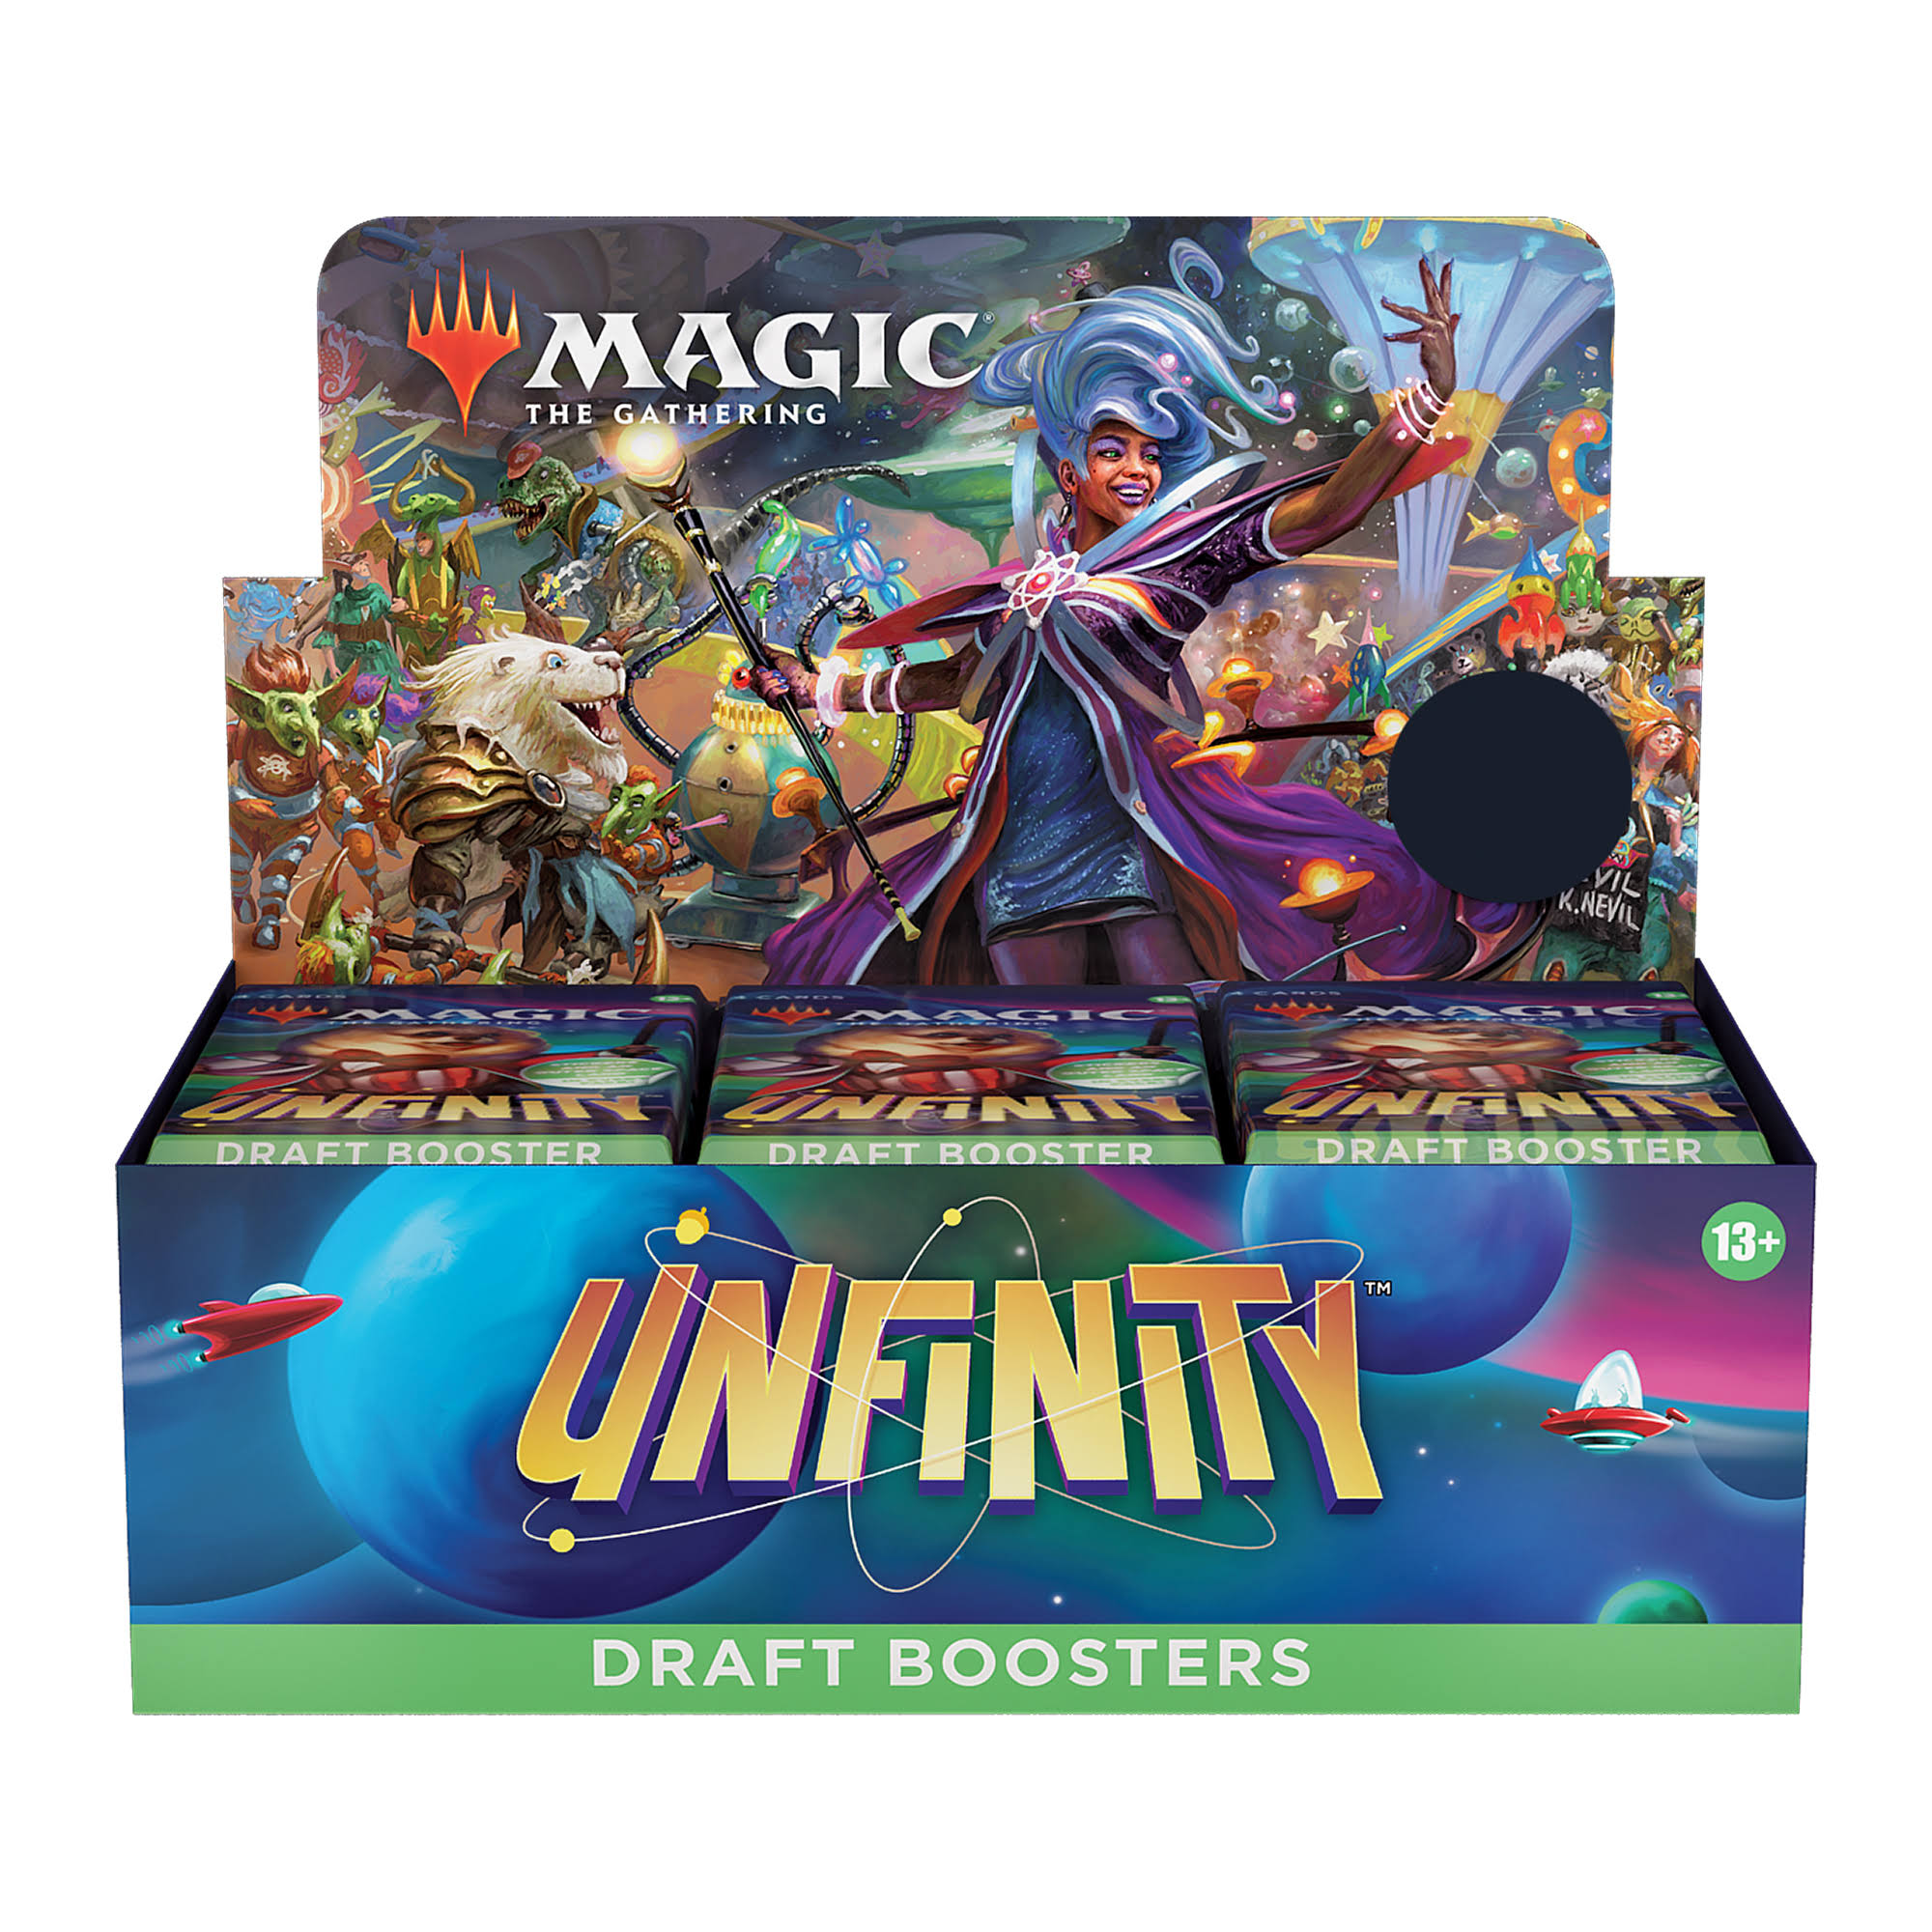 Magic The Gathering - Unfinity Draft Booster Box